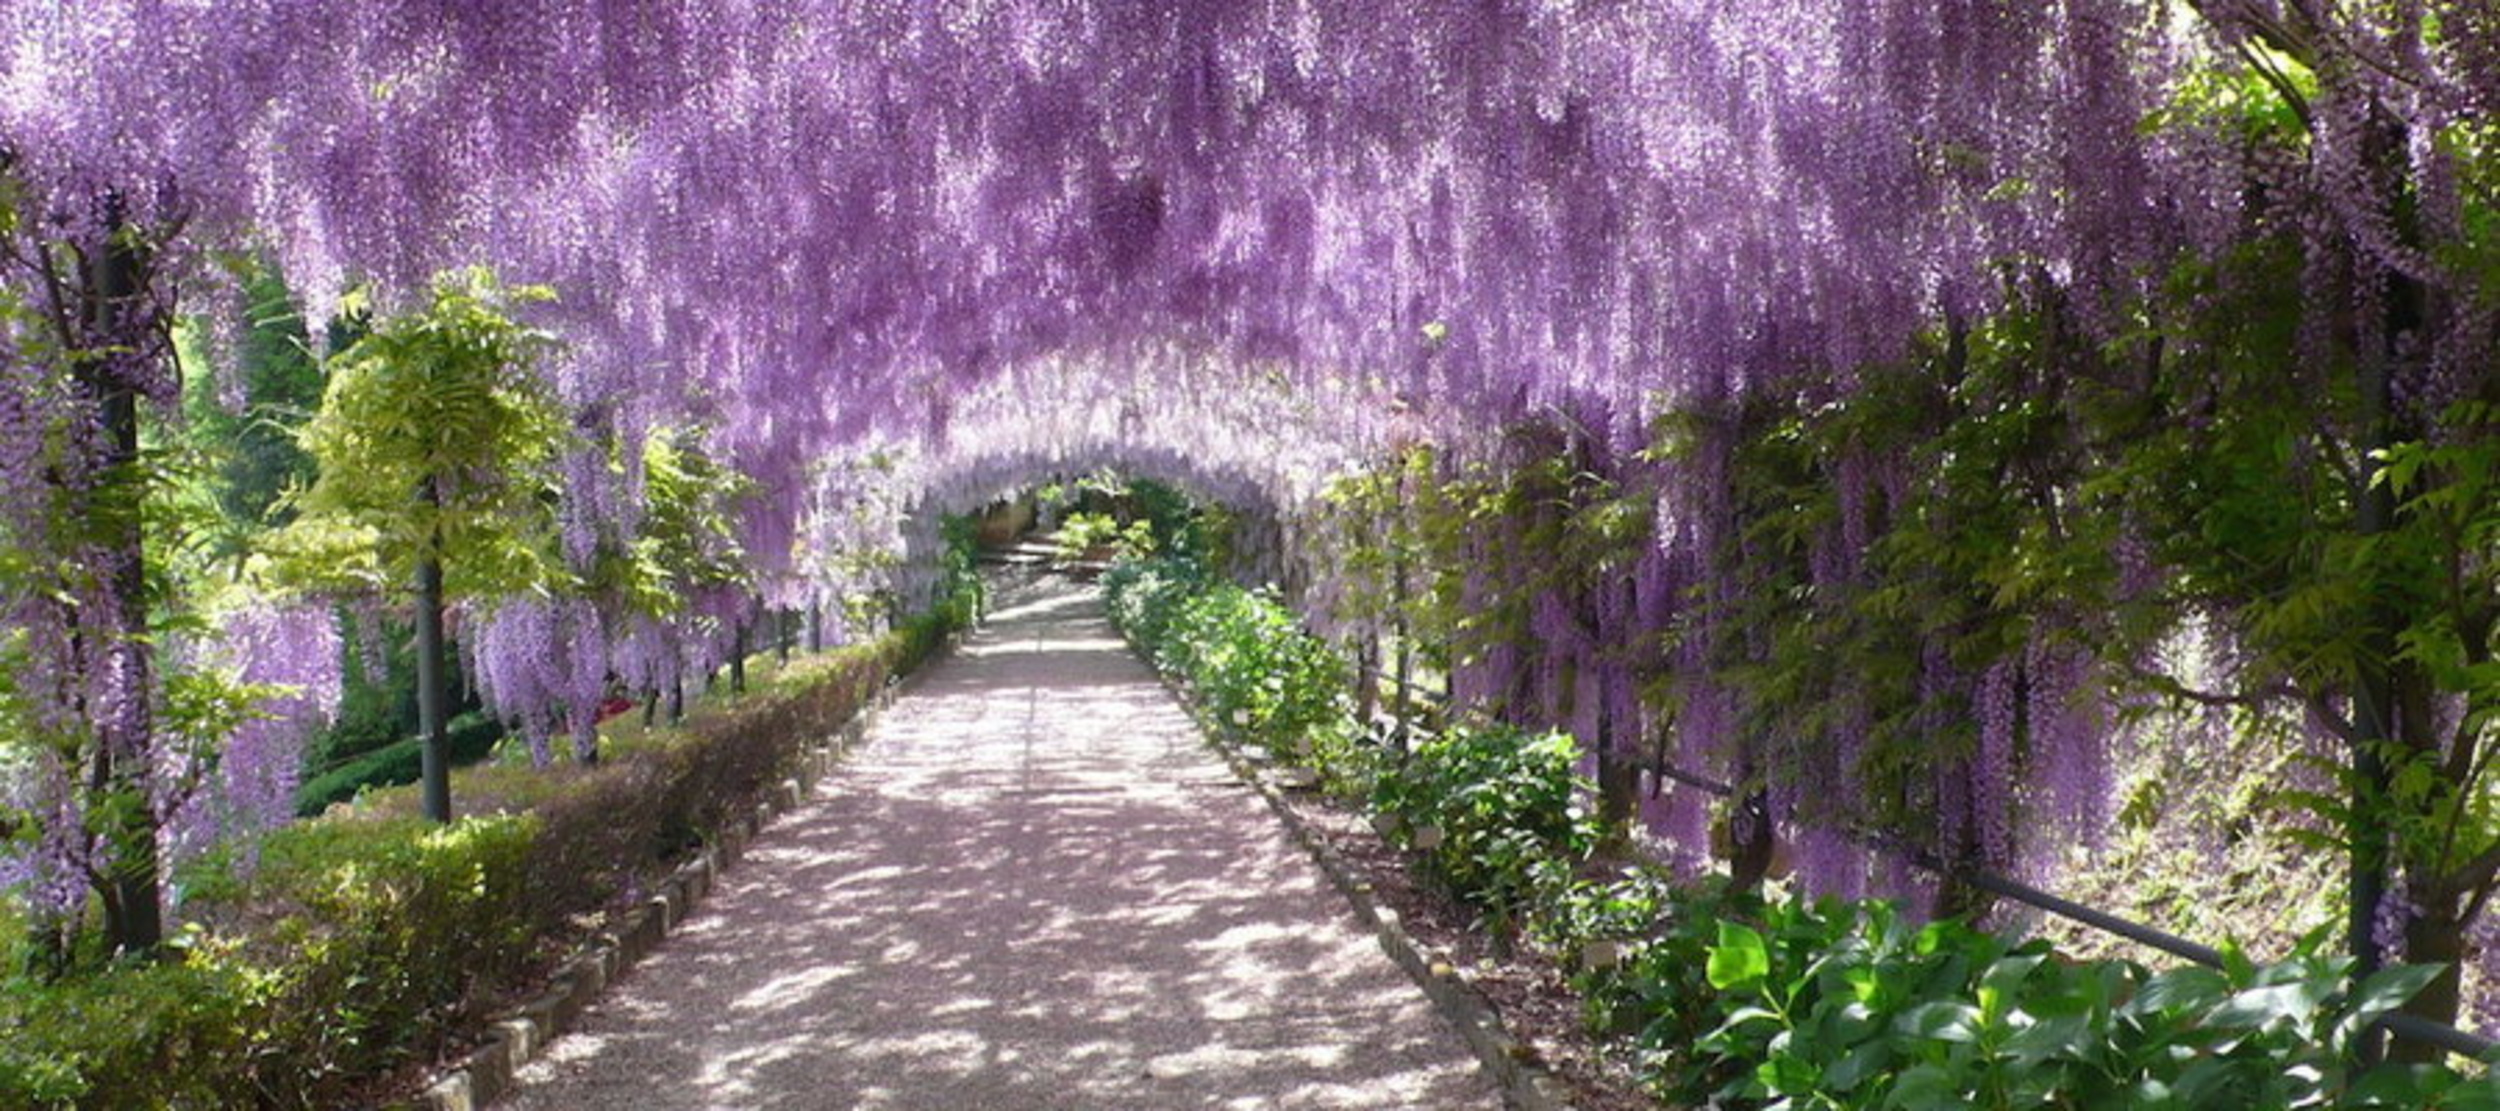 <p><span><span>If you want a slice of nature without actually going to...<em>nature</em>... there's no better place to visit than Giardino Bardini. Lined with olive groves, fountains and wisteria, everything here is tailor-made for relaxation. </span></span></p><p>You may also like: <a href='https://www.yardbarker.com/lifestyle/articles/13_ben_jerrys_flavors_we_love_and_13_we_can_do_without_112423/s1__37671486'>13 Ben & Jerry’s flavors we love and 13 we can do without</a></p>